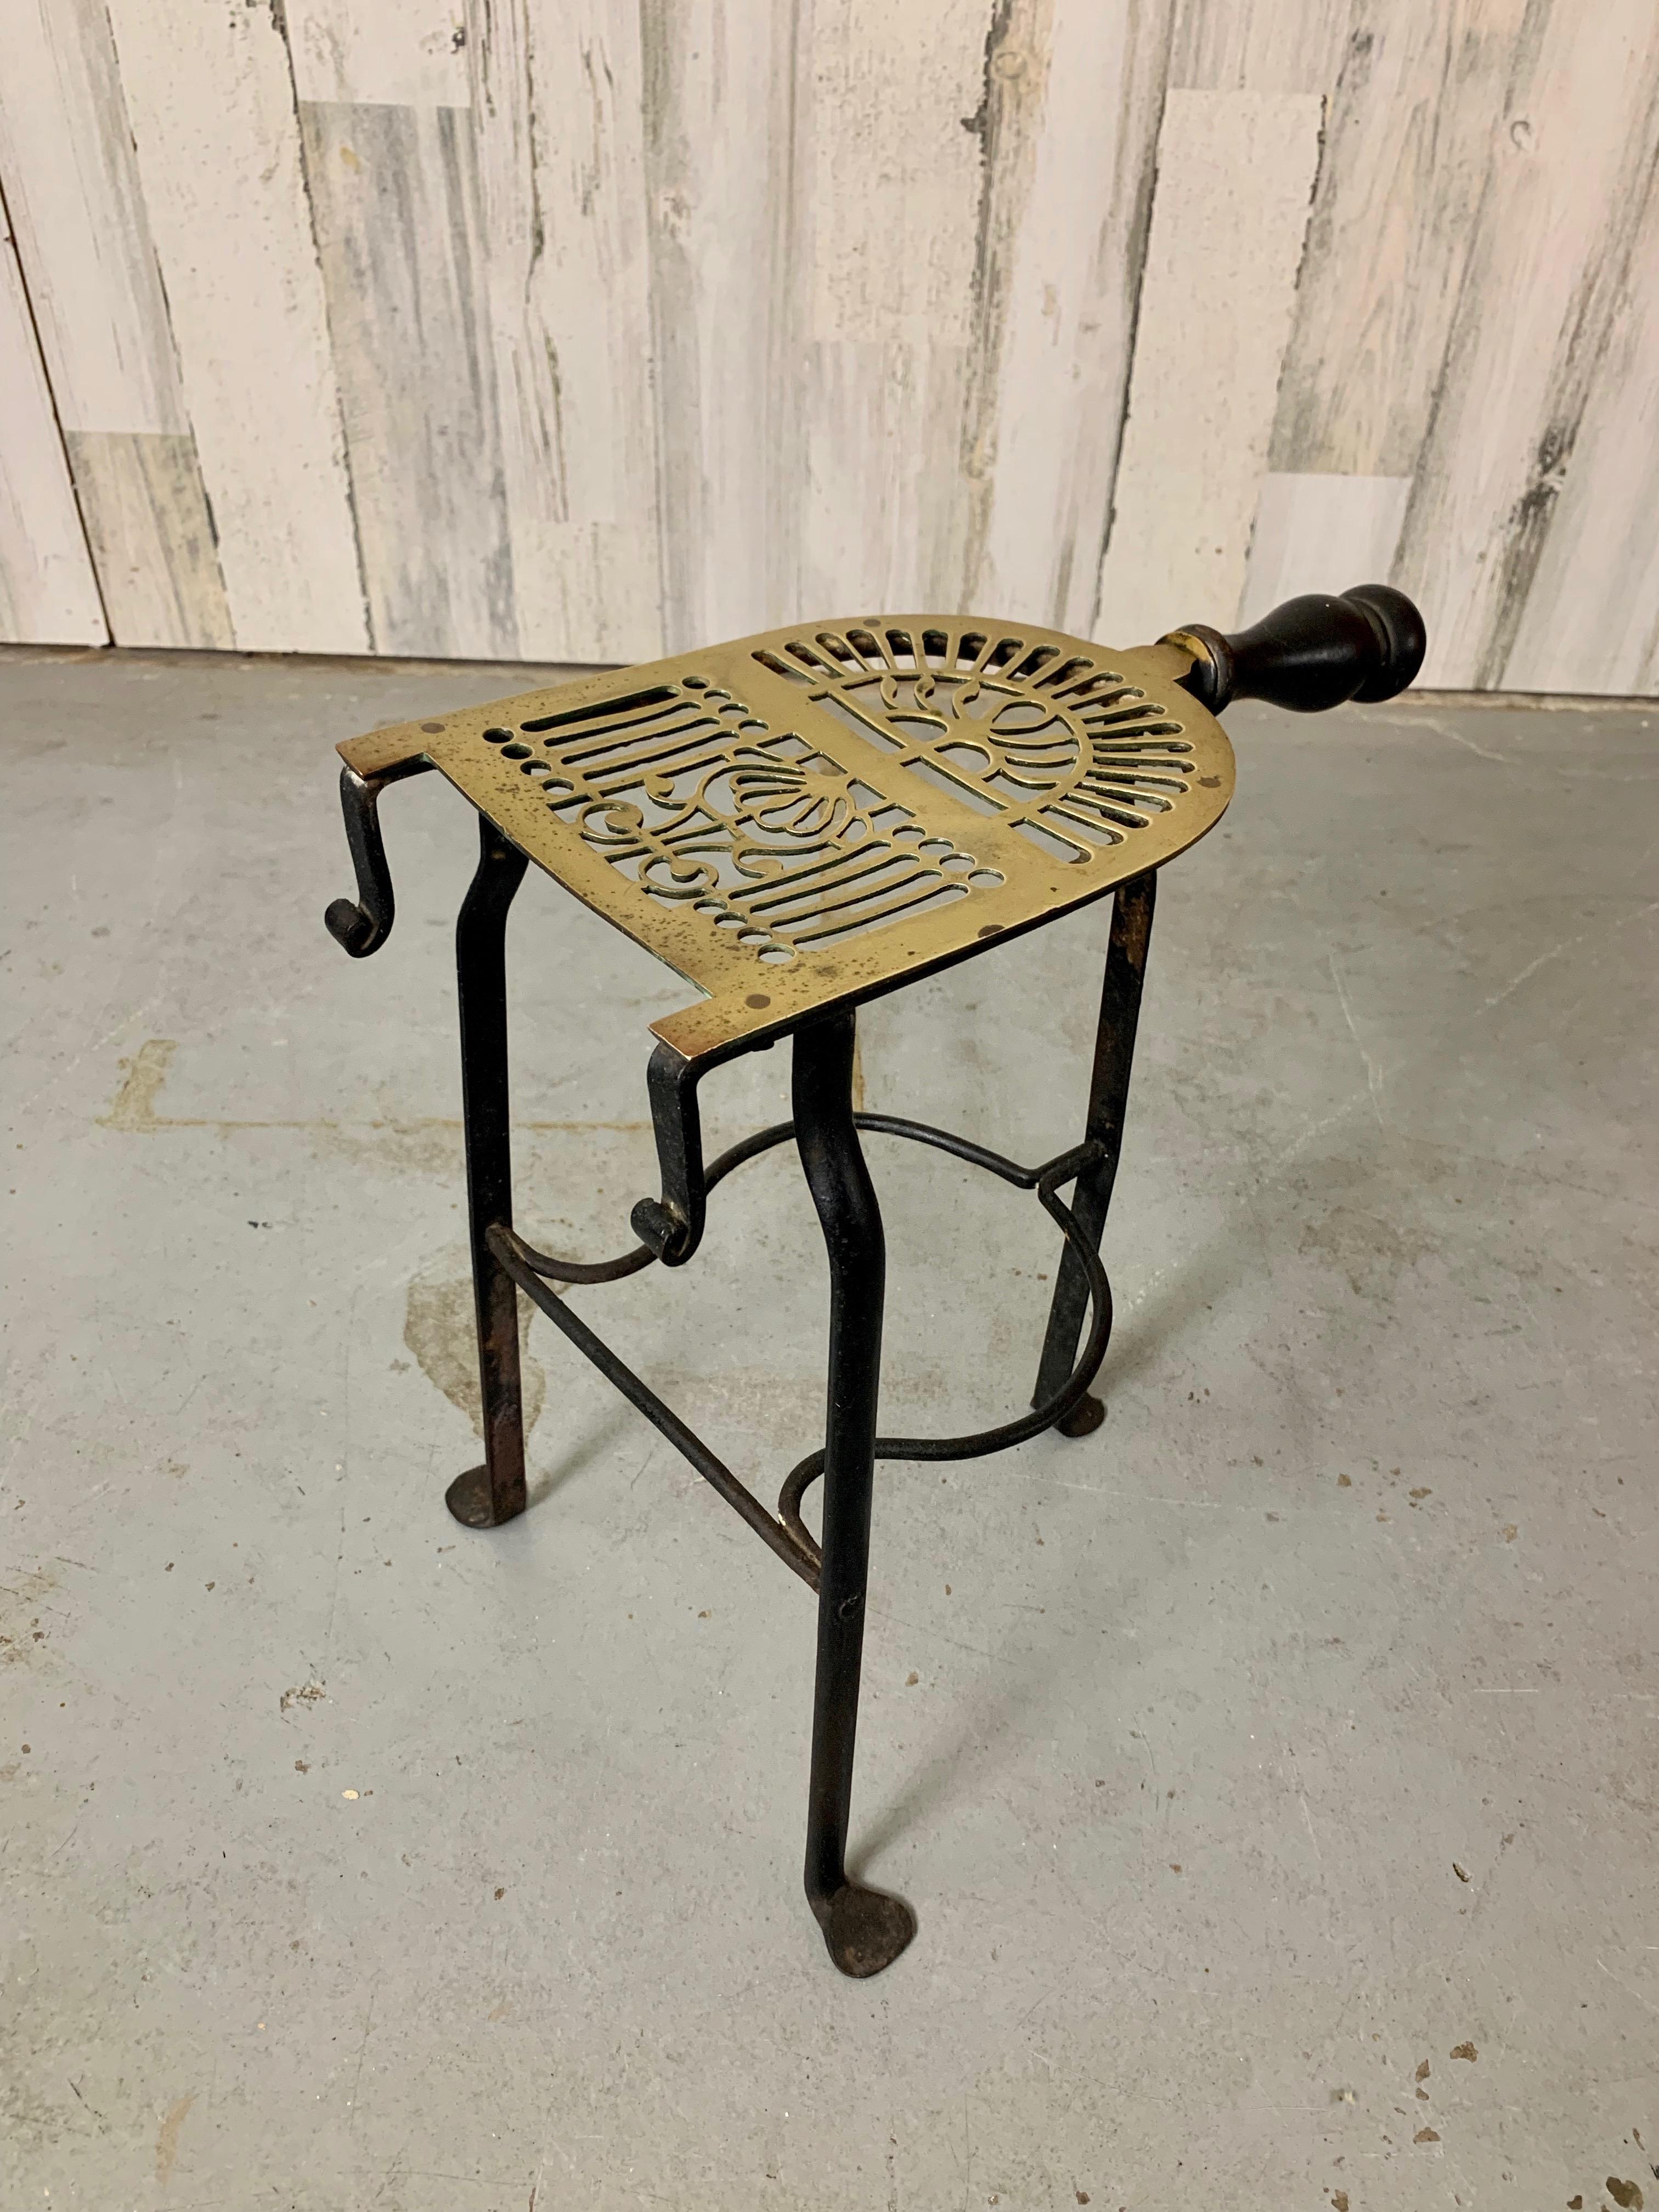 Hand cut brass plate mounted on hand forged iron tripod base with turned-wooden handle. Great fireplace accent or plant stand.